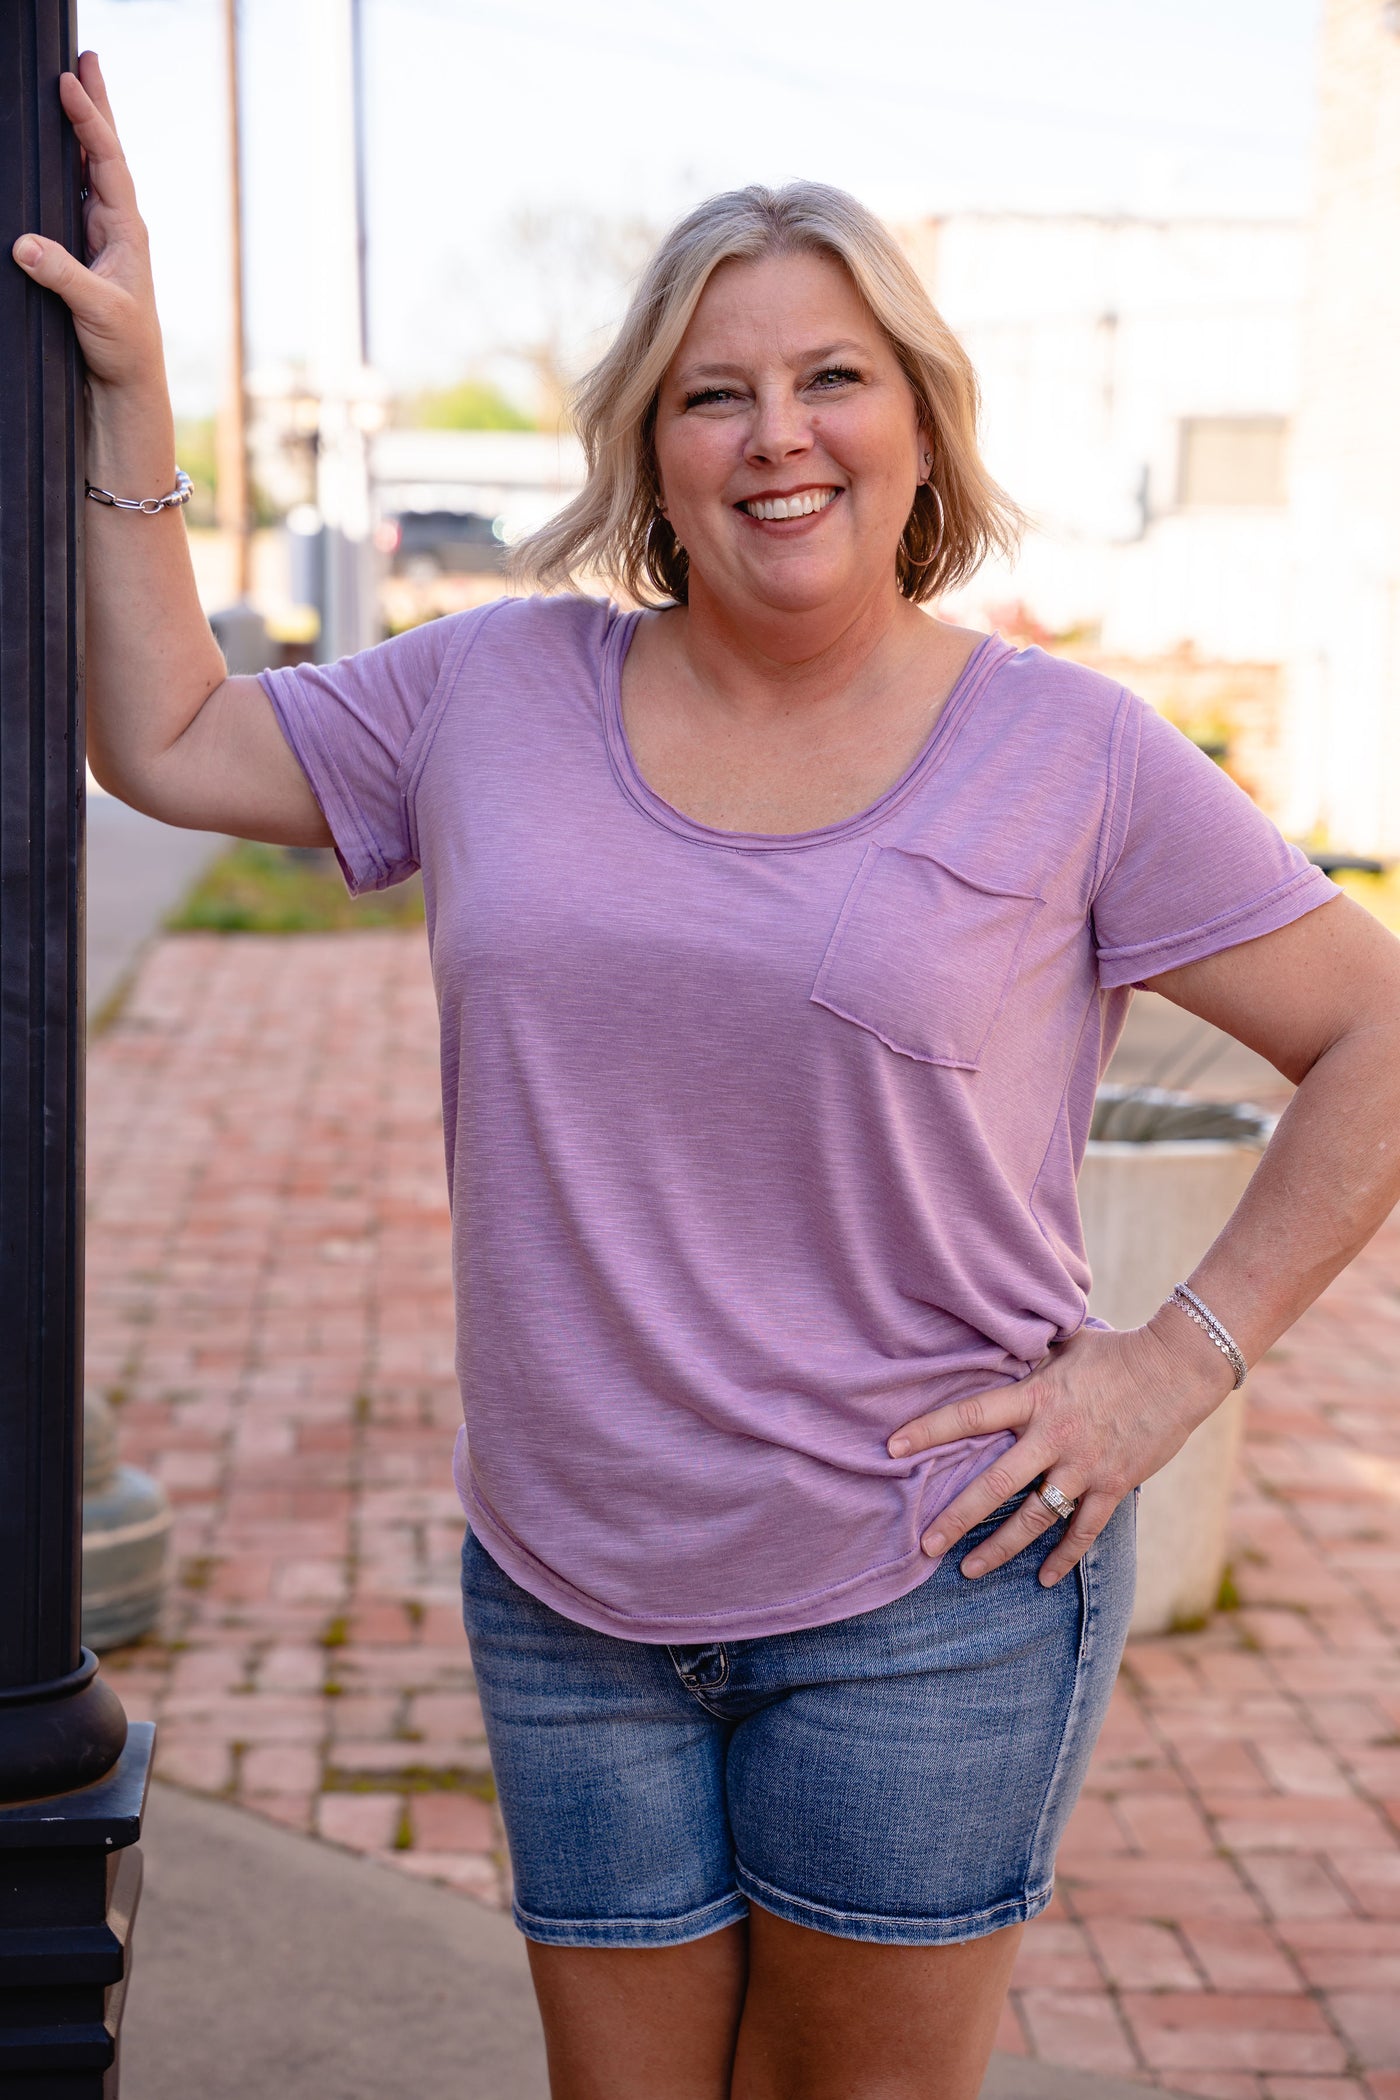 Scoop Neck Short Sleeve Top - Lilac Purple-Tops-POL Clothing-Market Street Nest, Fashionable Clothing, Shoes and Home Décor Located in Mabank, TX